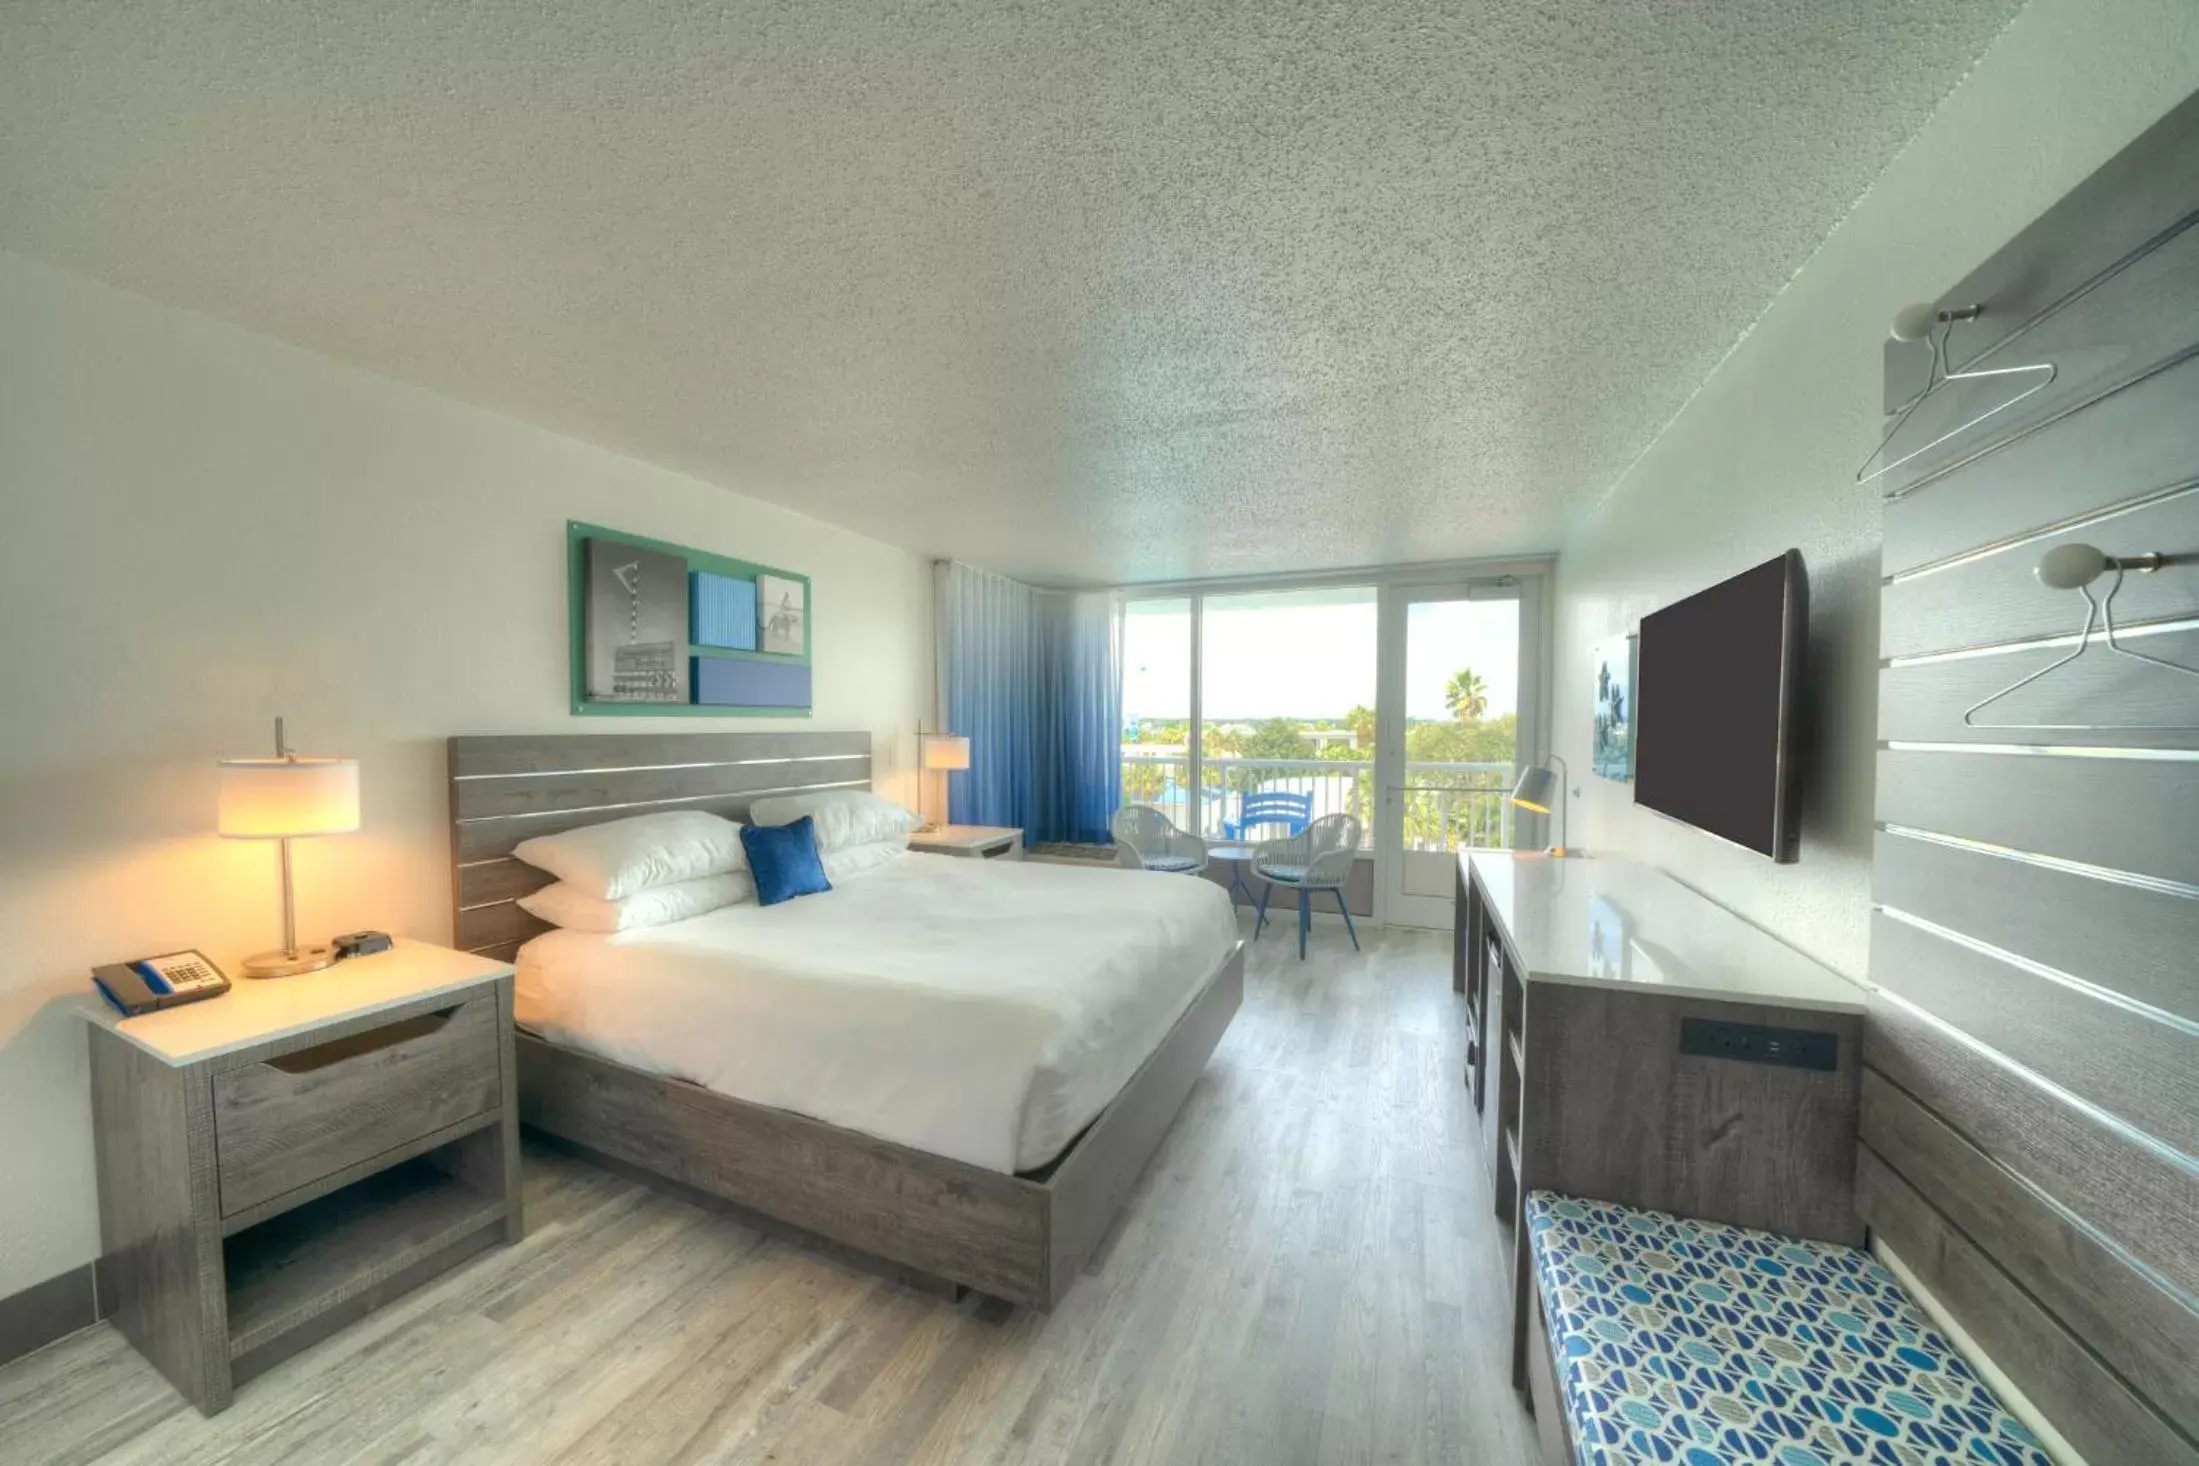 Photo of the whole room in The Island Resort at Fort Walton Beach